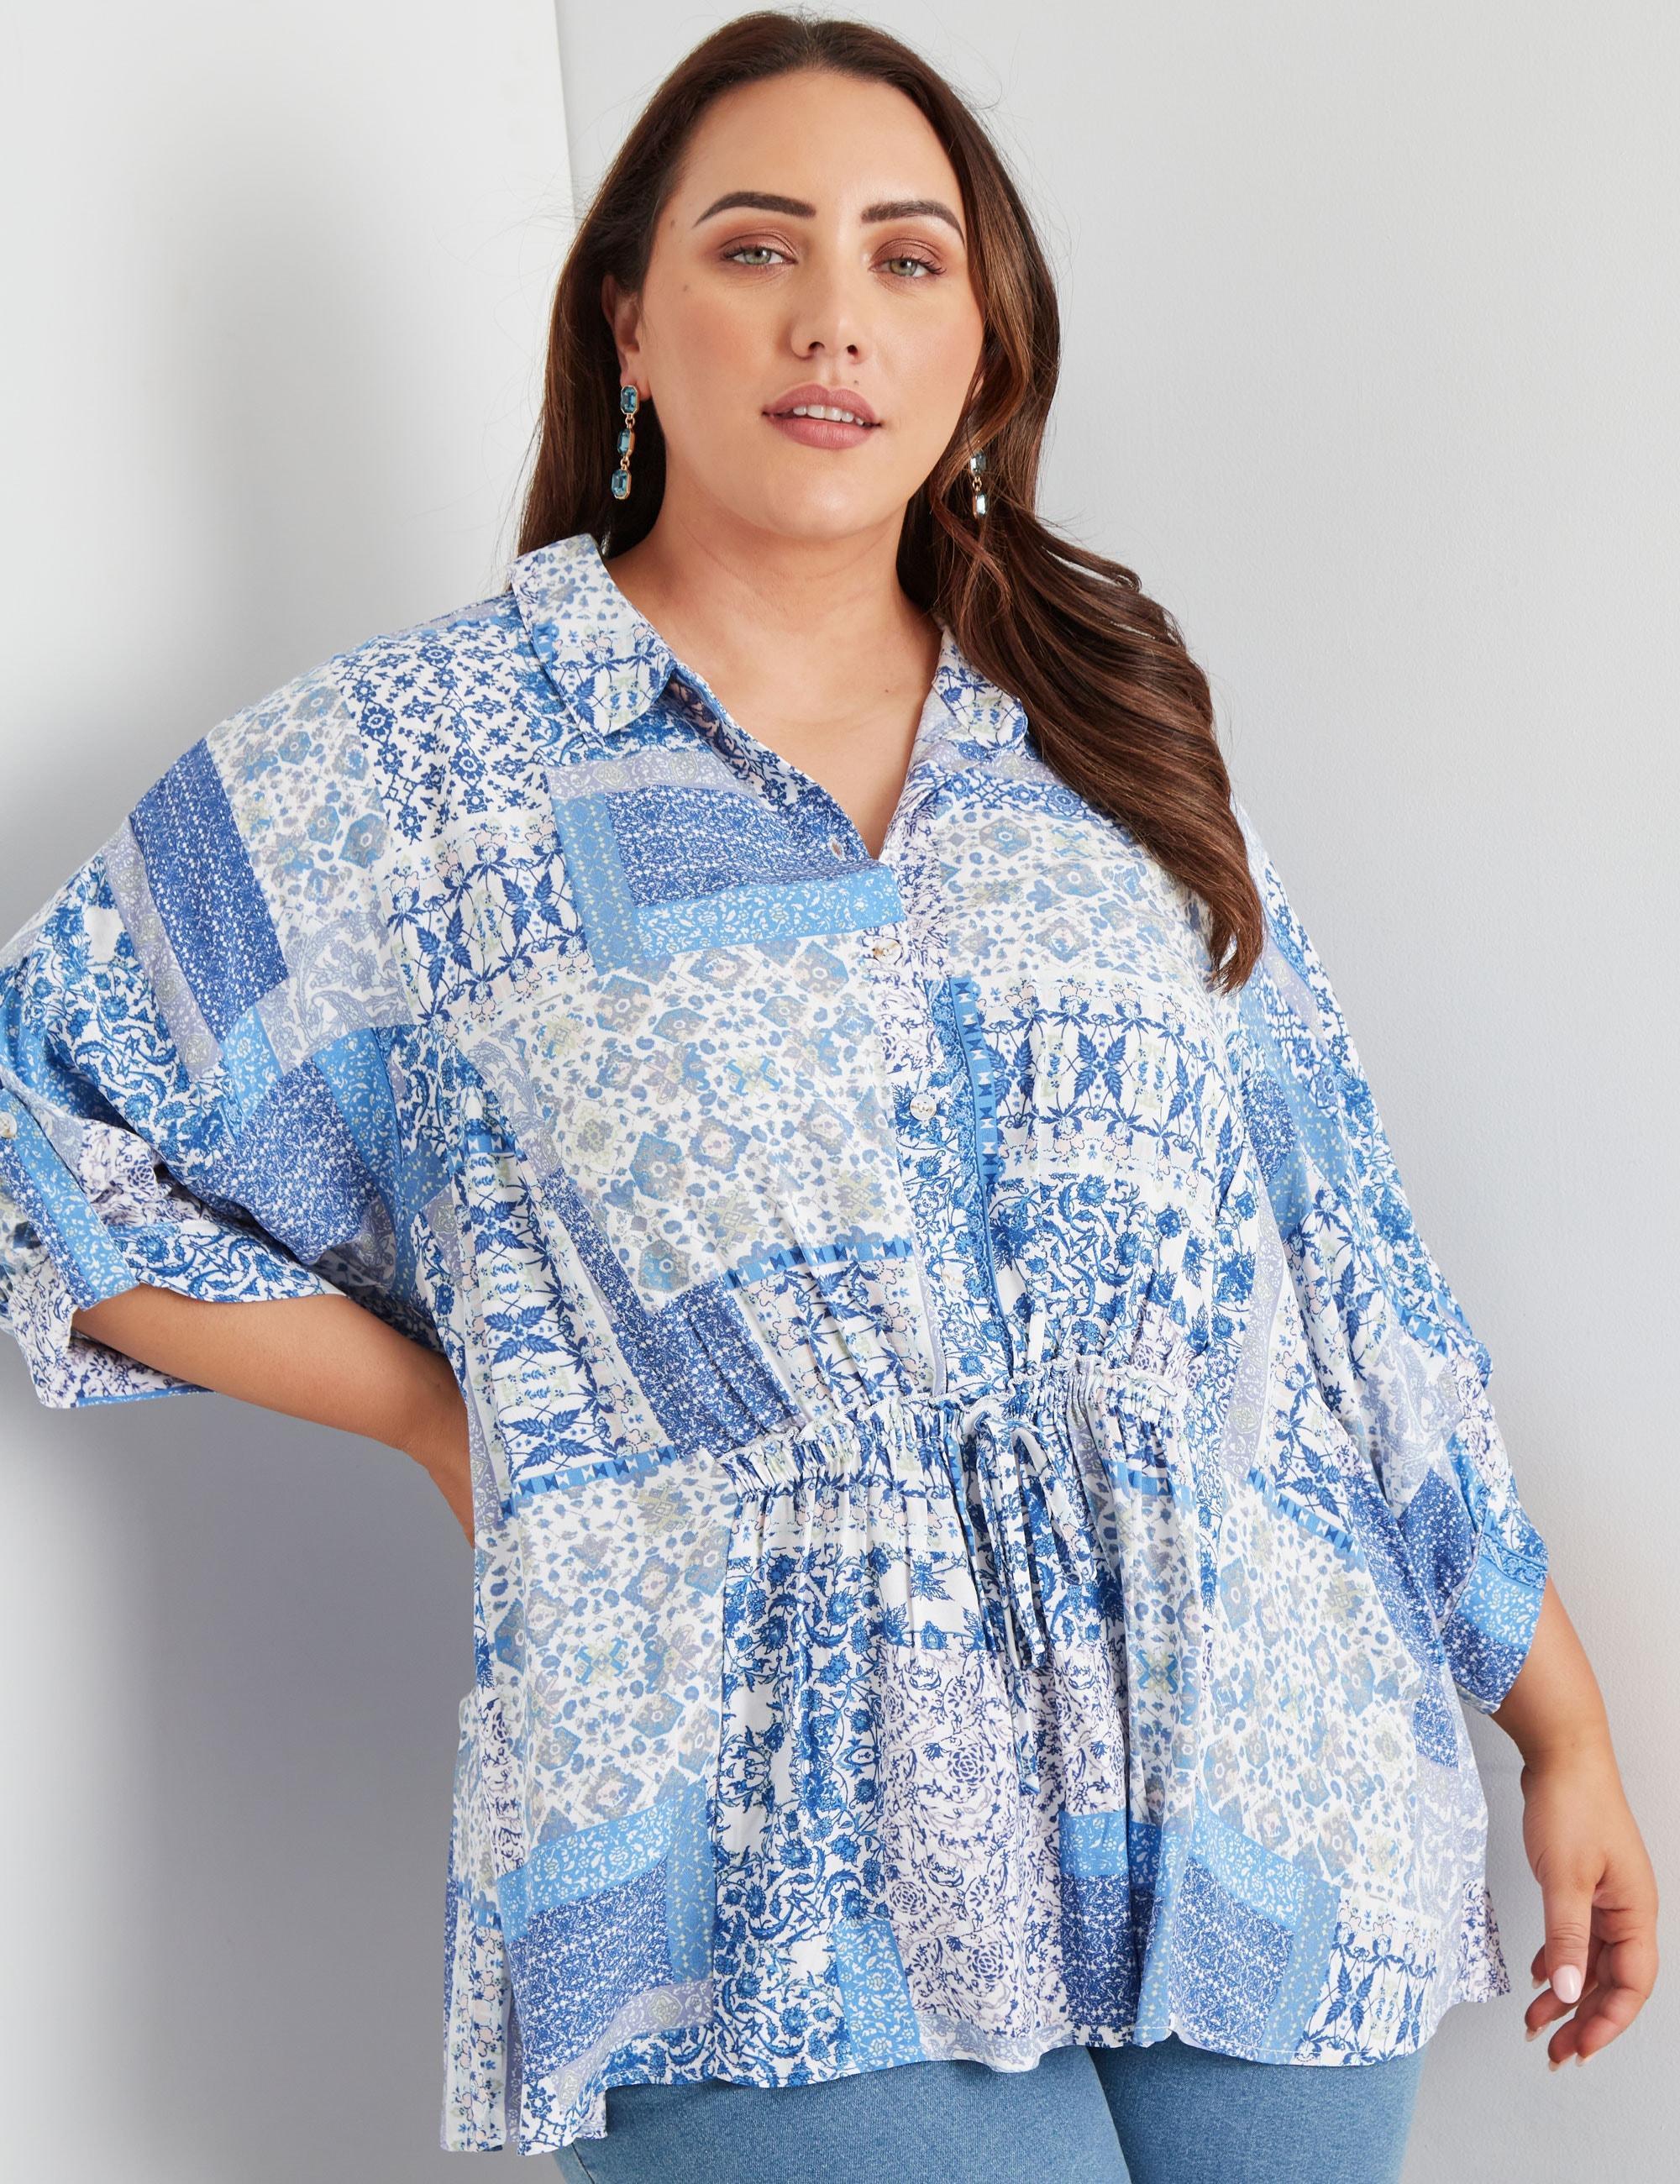 BeMe - Plus Size - Womens Summer Tops - Blue Blouse / Shirt - Abstract - Casual - Relaxed Fit - 3/4 Sleeve - High Neck - Regular - Fashion Work Wear